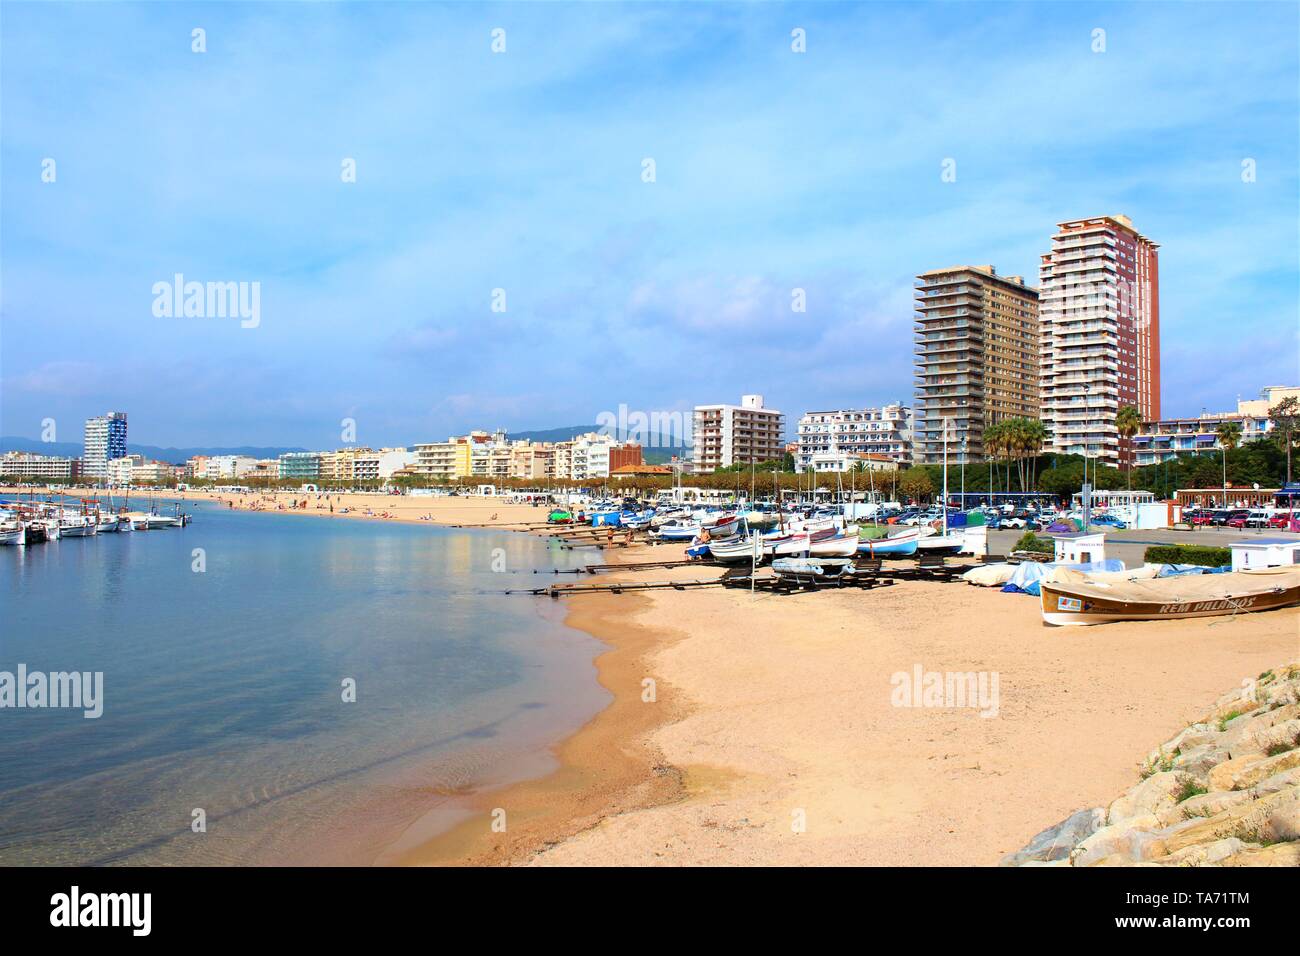 Palamos, Costa Brava, Spain: Tourists and locals enjoying the coastline of the small fishing town of Palamos. Stock Photo